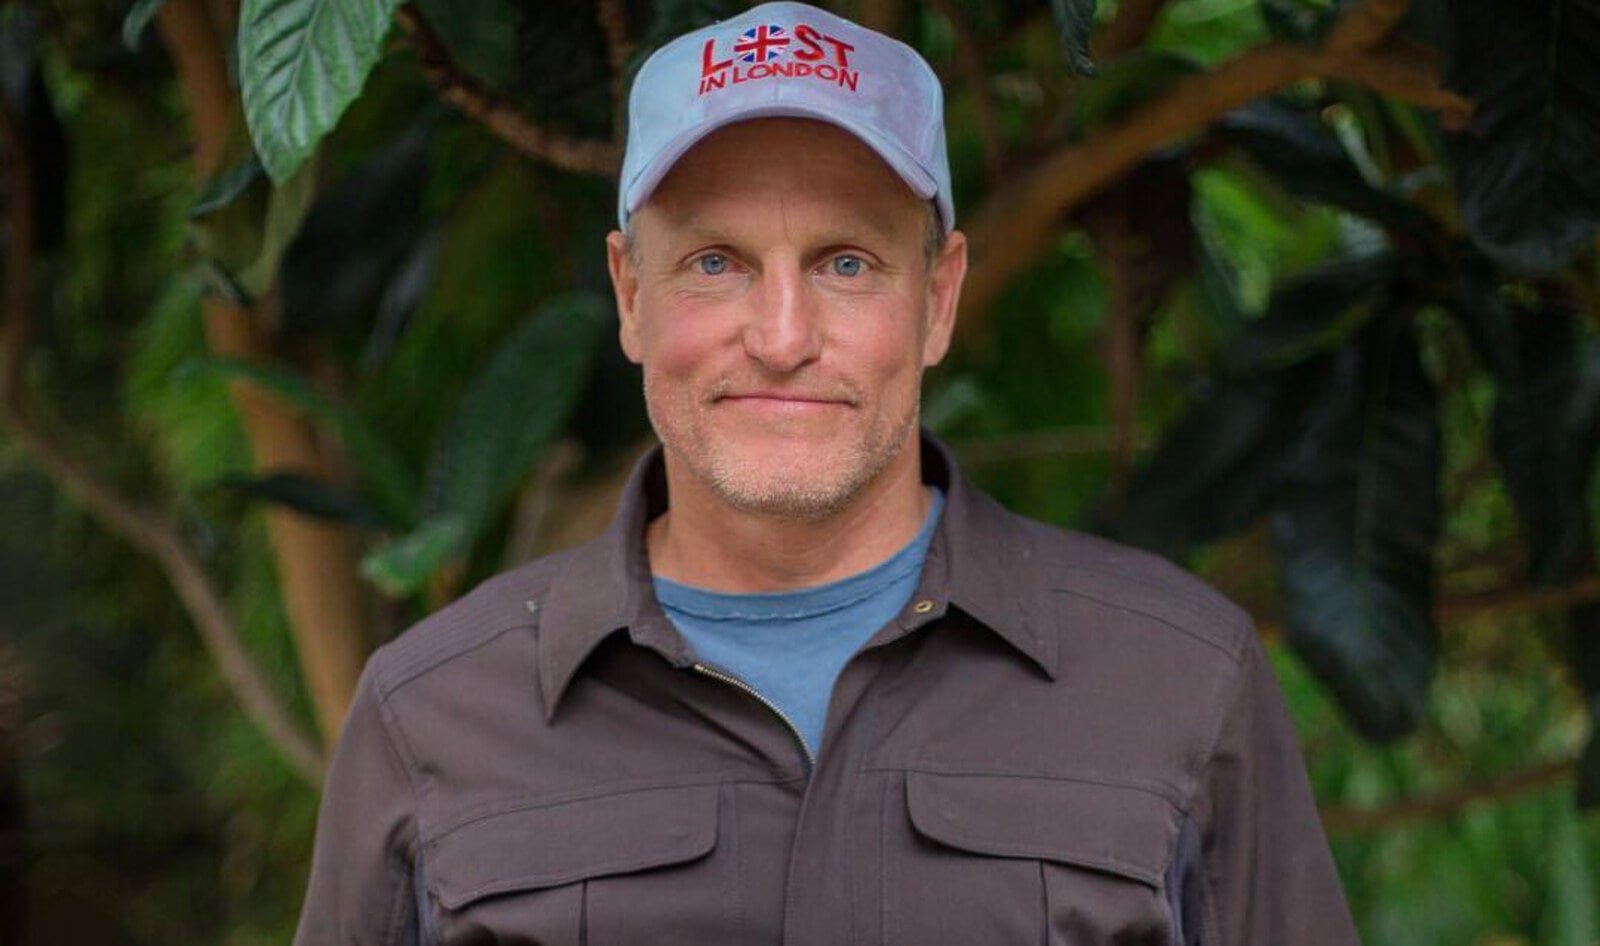 Brothers Chad and Derek Sarno Raise $20 Million to Grow Vegan Brand with Help from Woody Harrelson